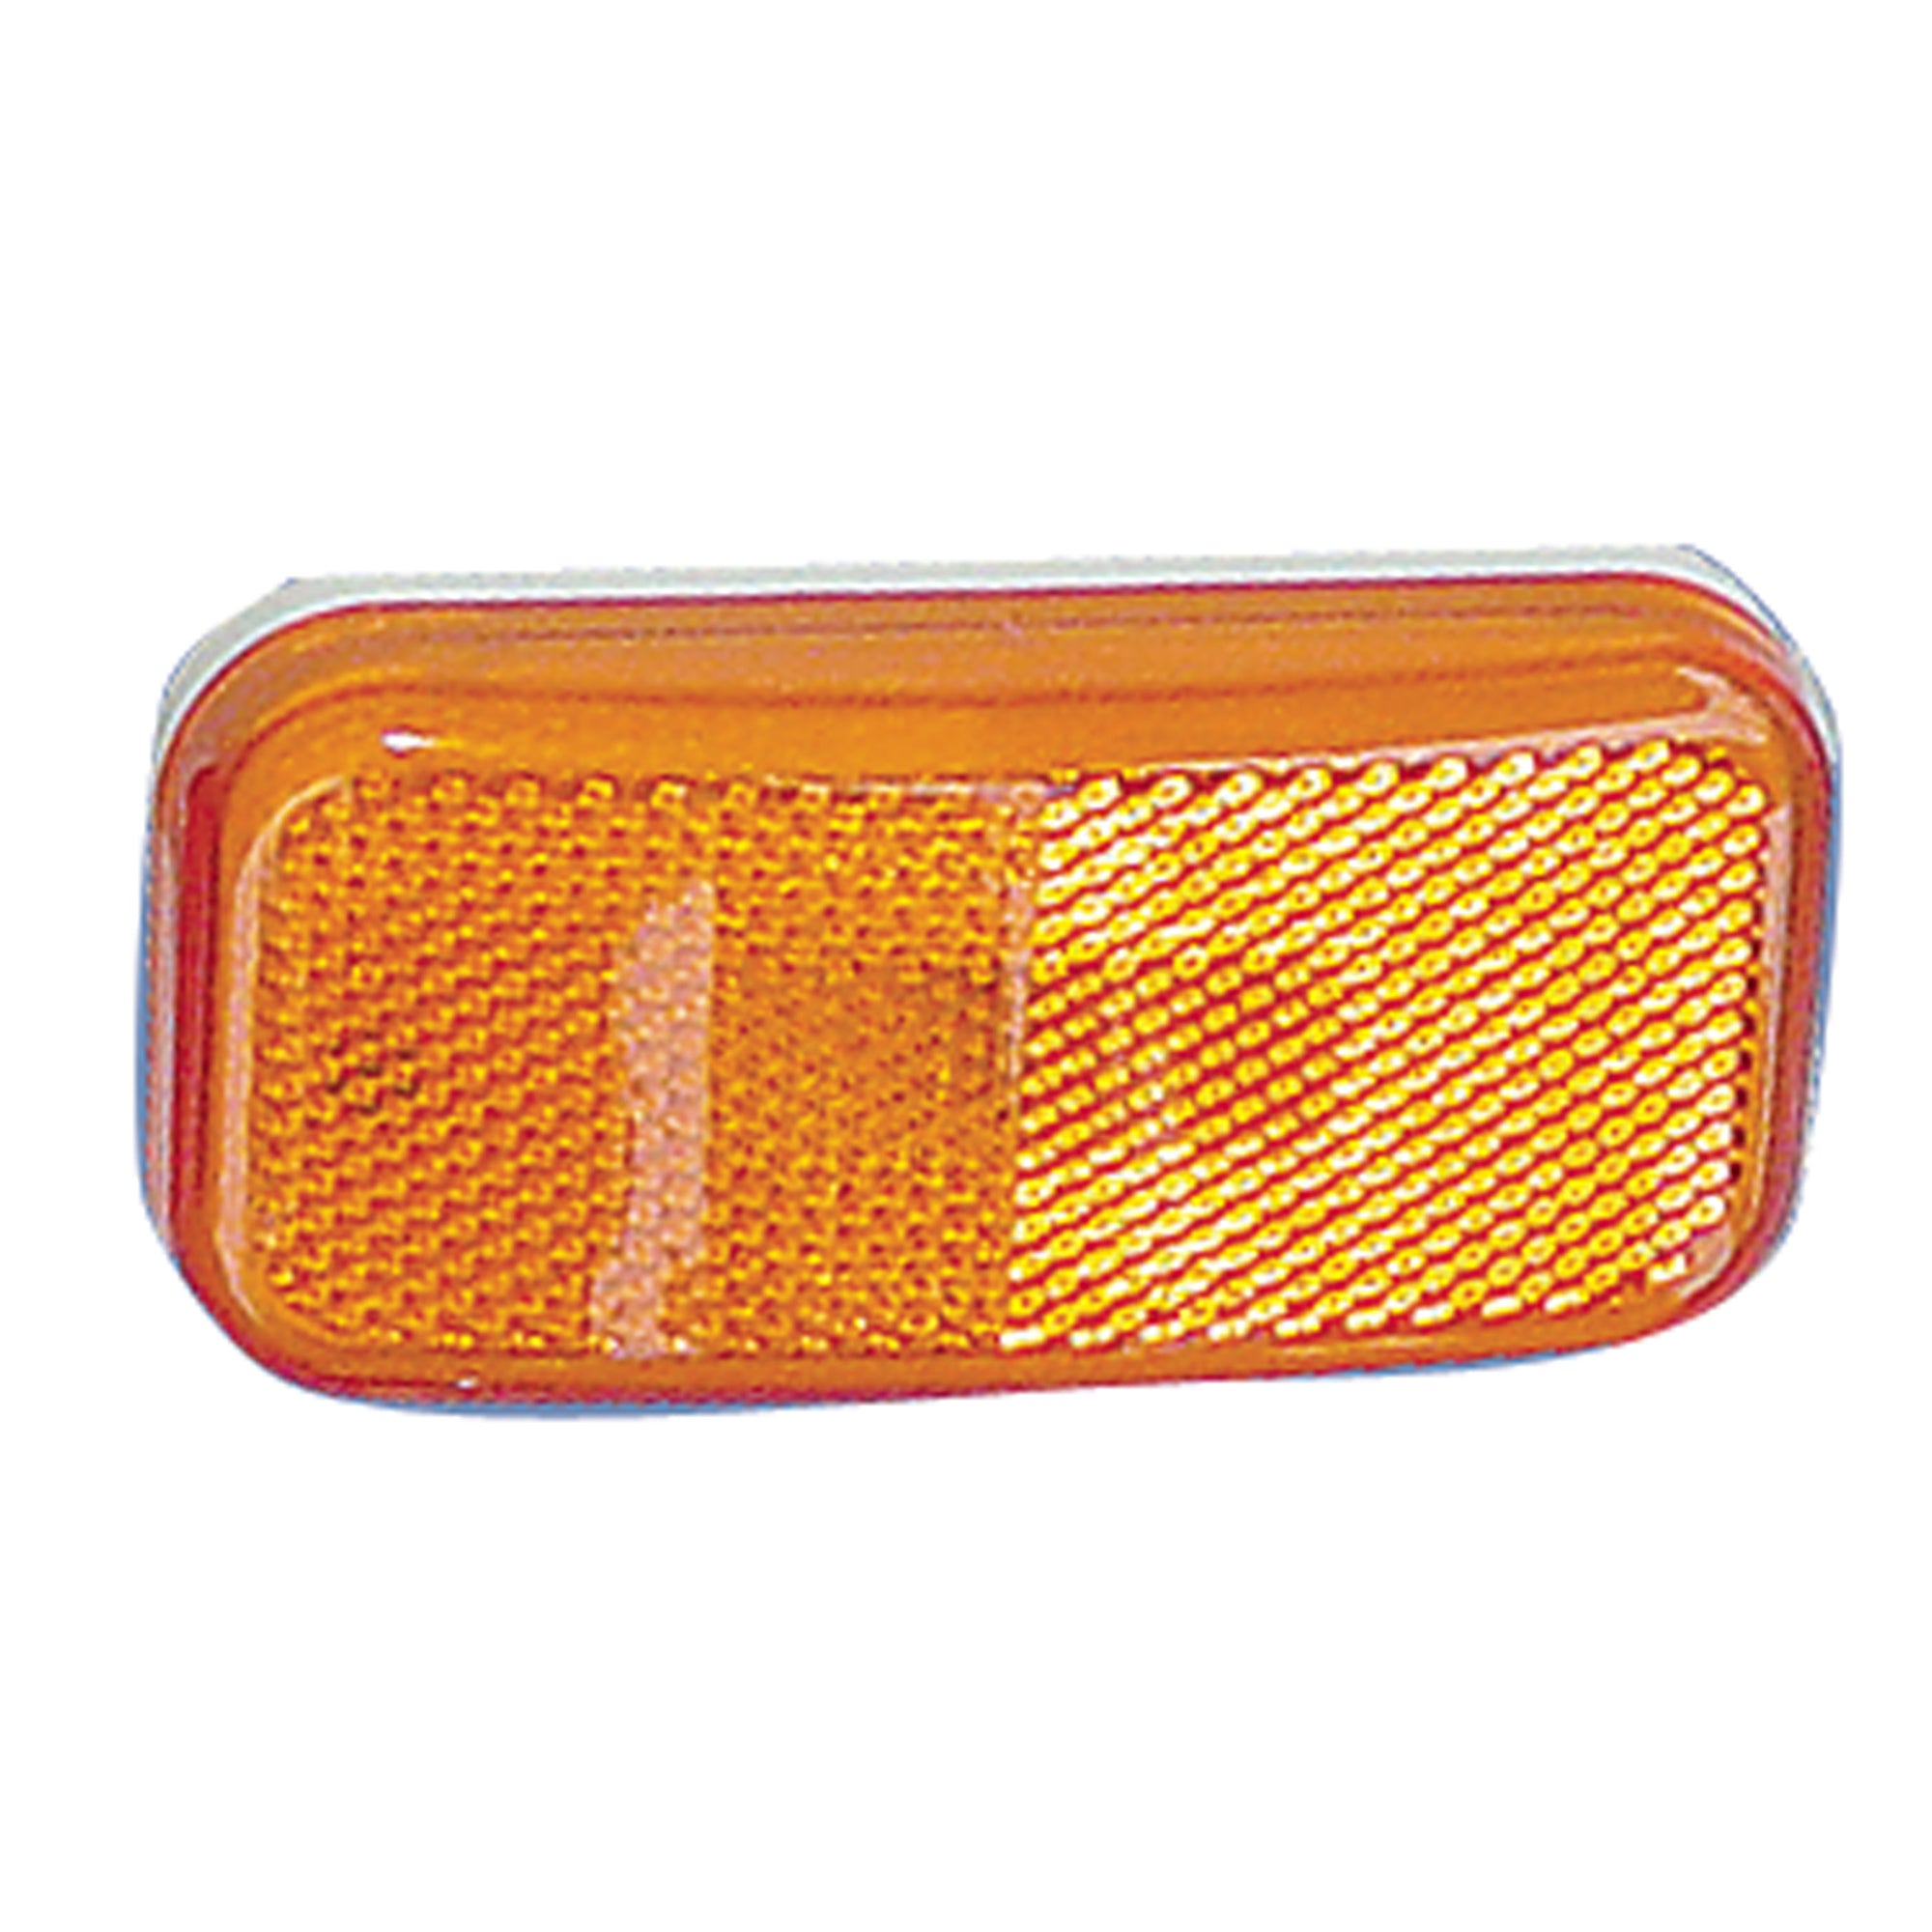 Fasteners Unlimited 003-58L Command Electronics Rounded Corner LED Clearance Light - Amber with White Base